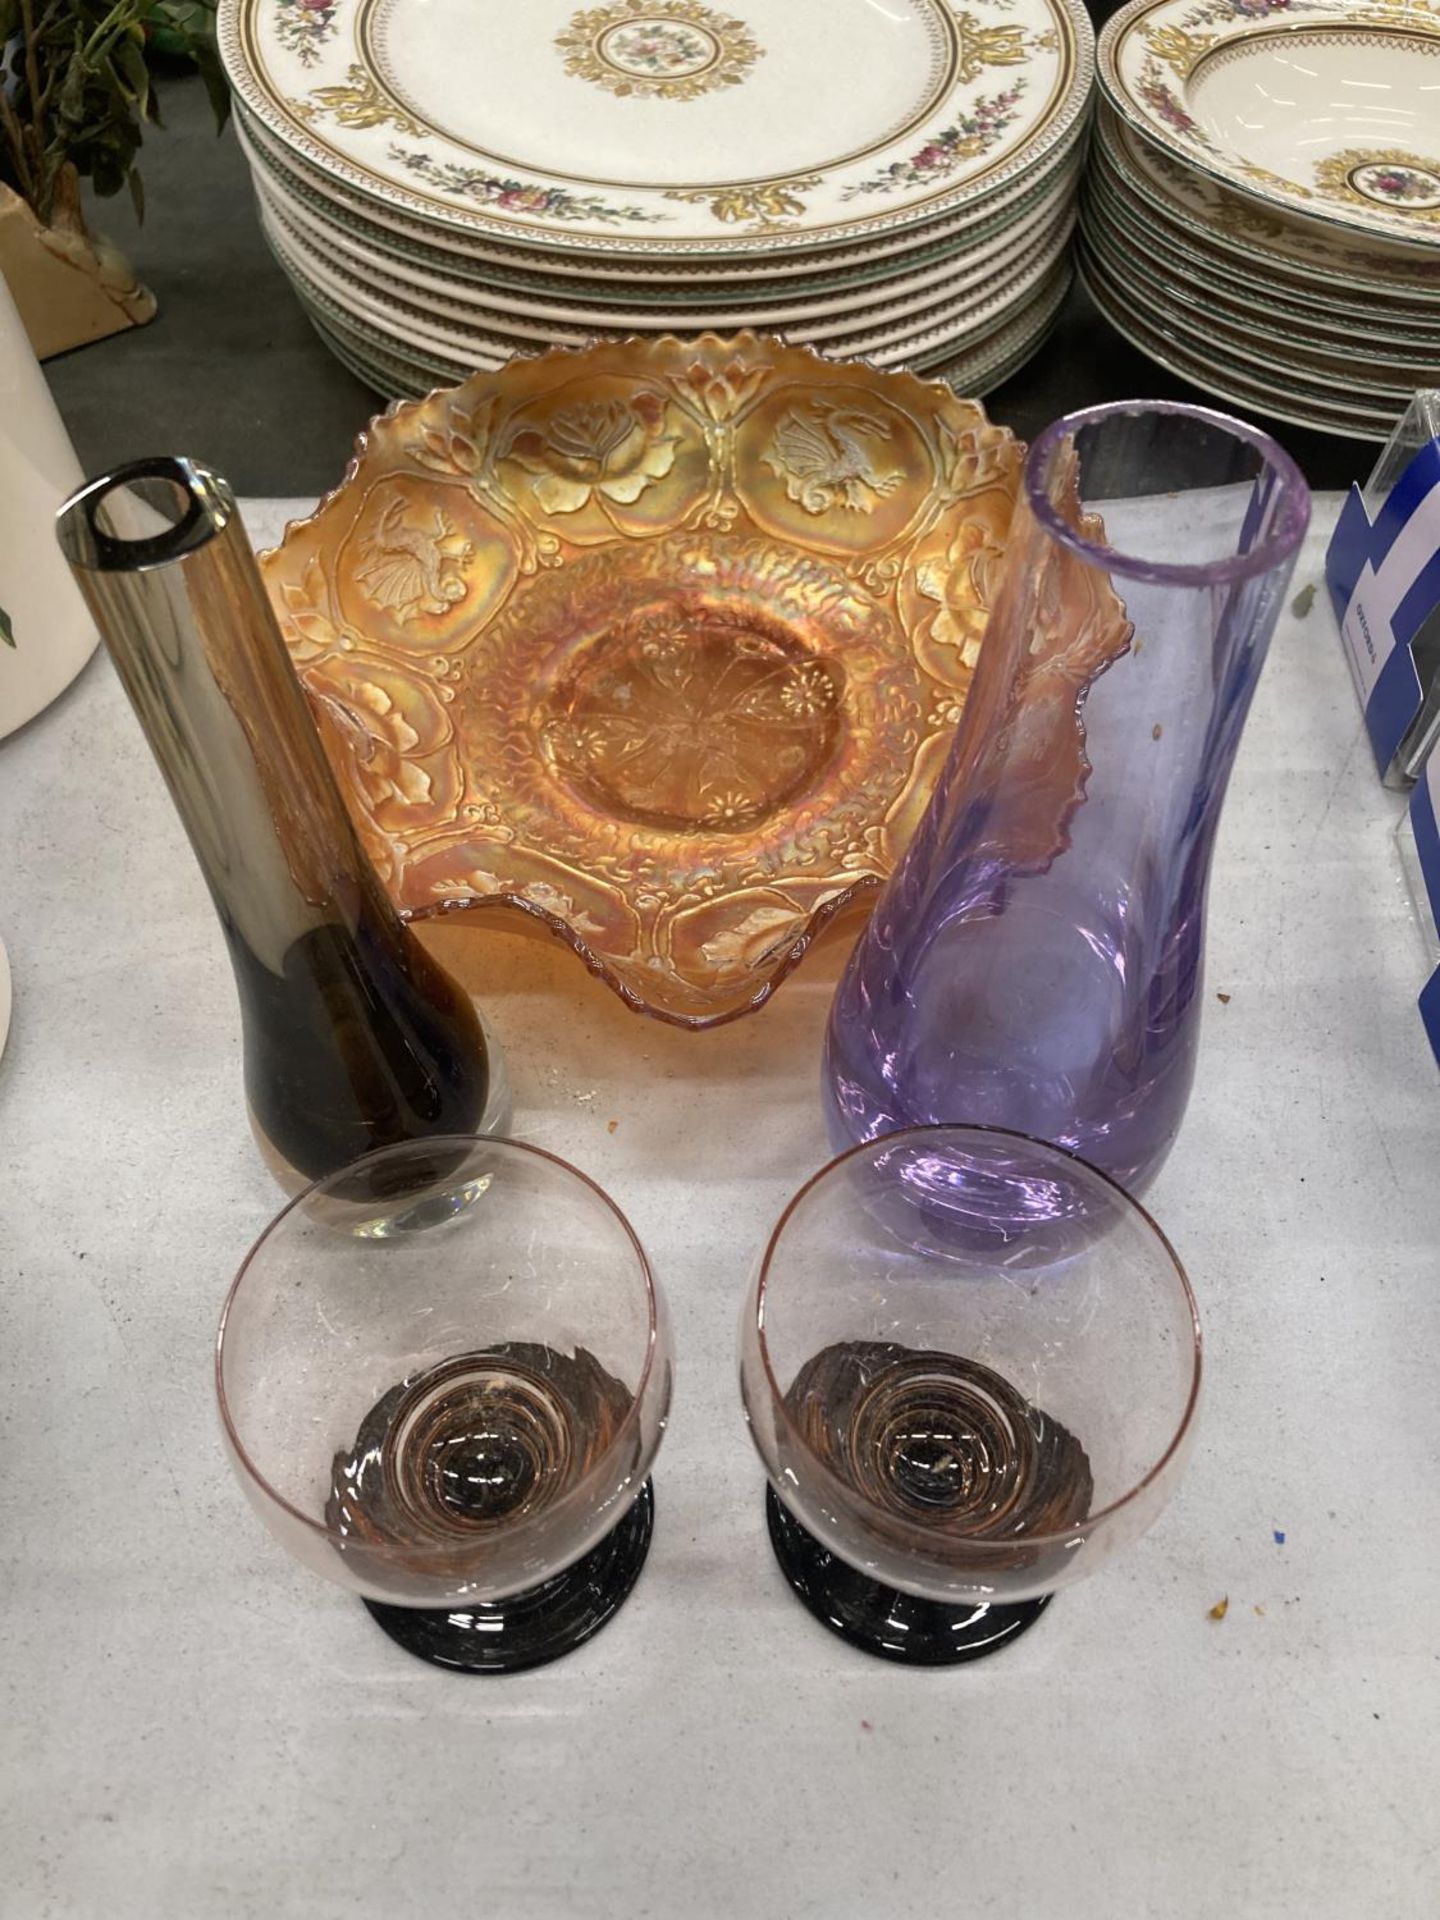 A QUANTITY OF GLASSWARE TO INCLUDE A CARNIVAL GLASS BOWL, VASES AND GLASSES